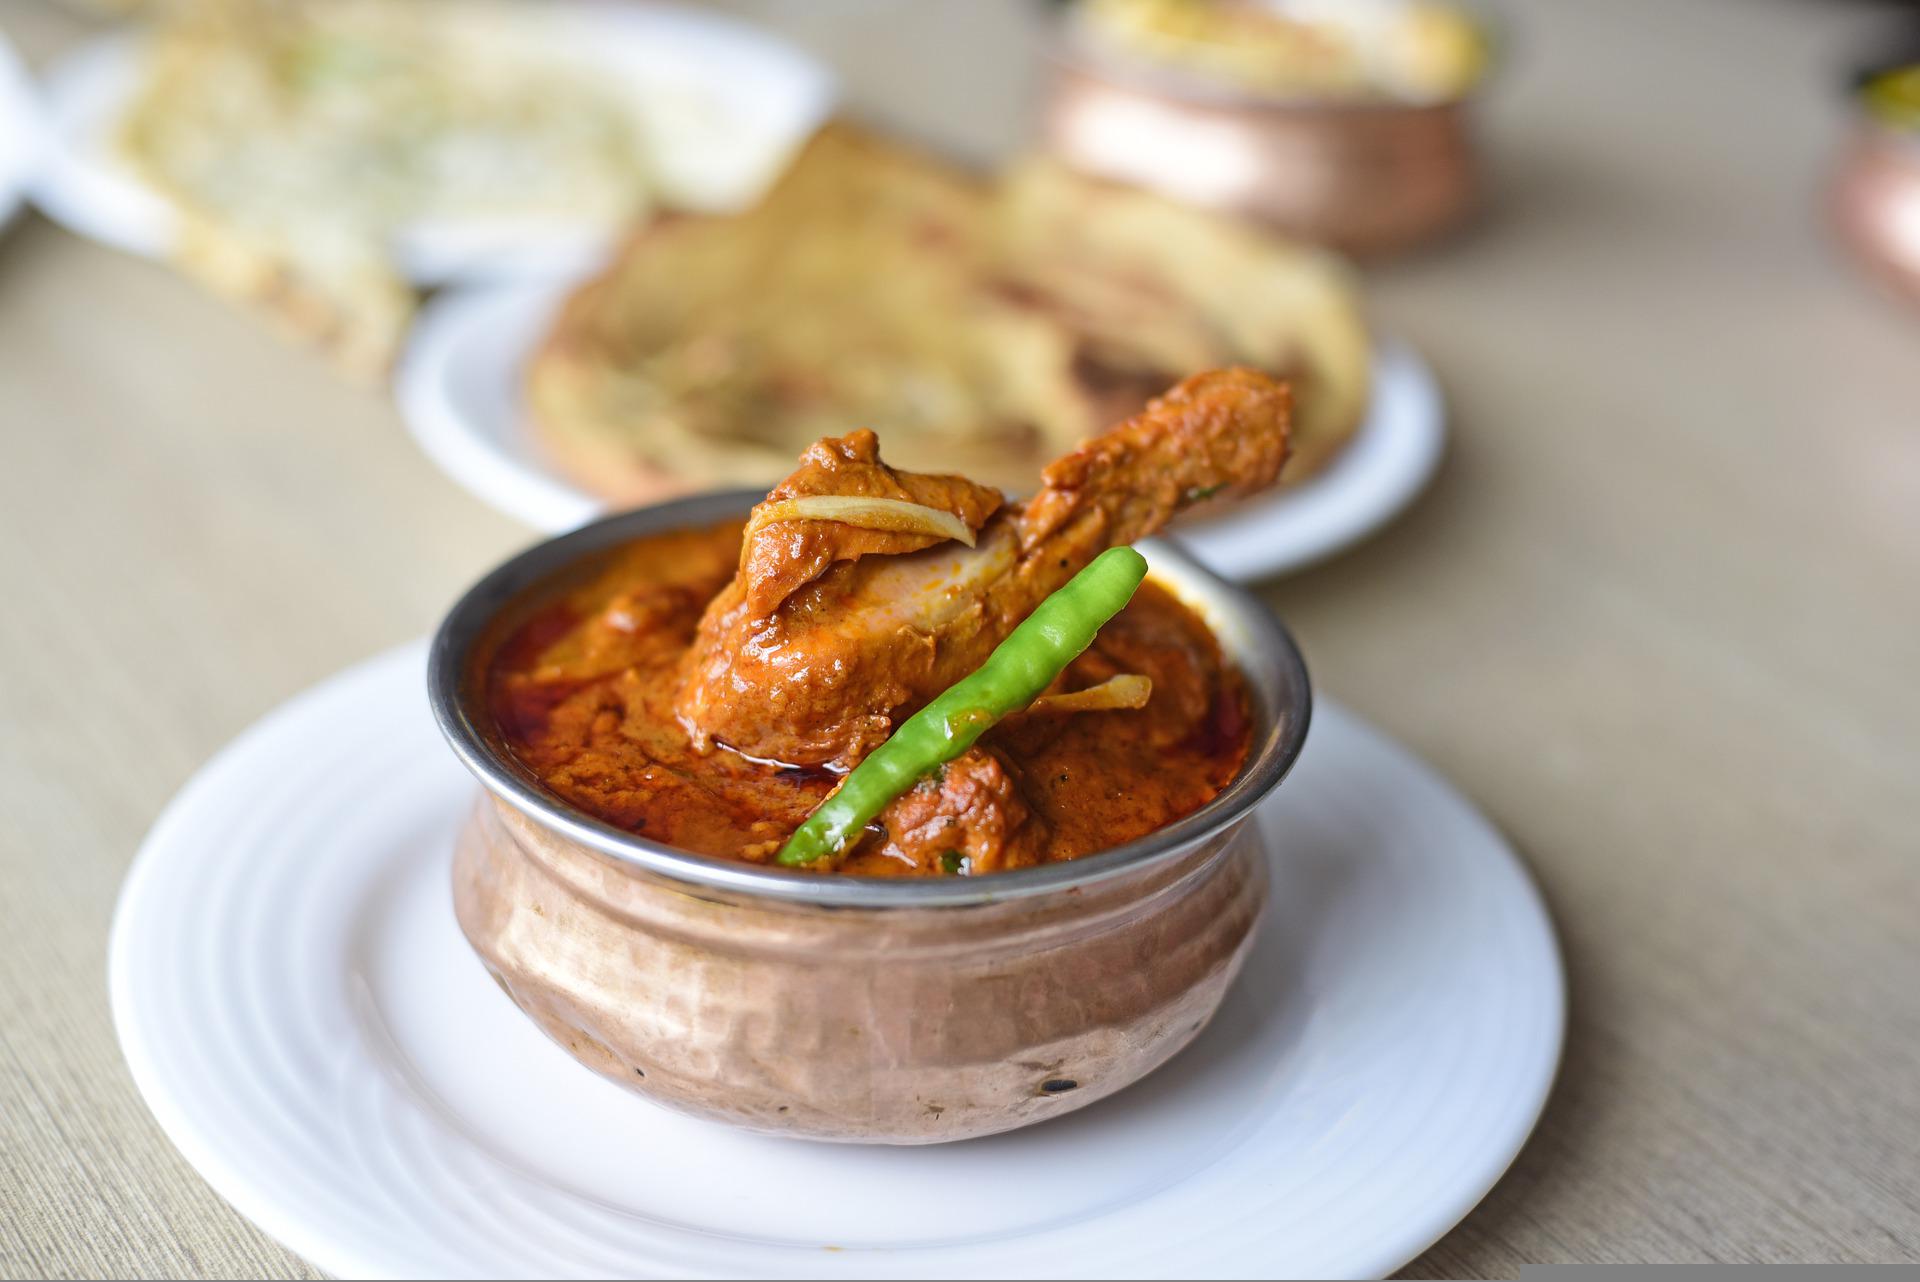 Authentic Indian cuisine available at Masala Mantra Cape Coral.